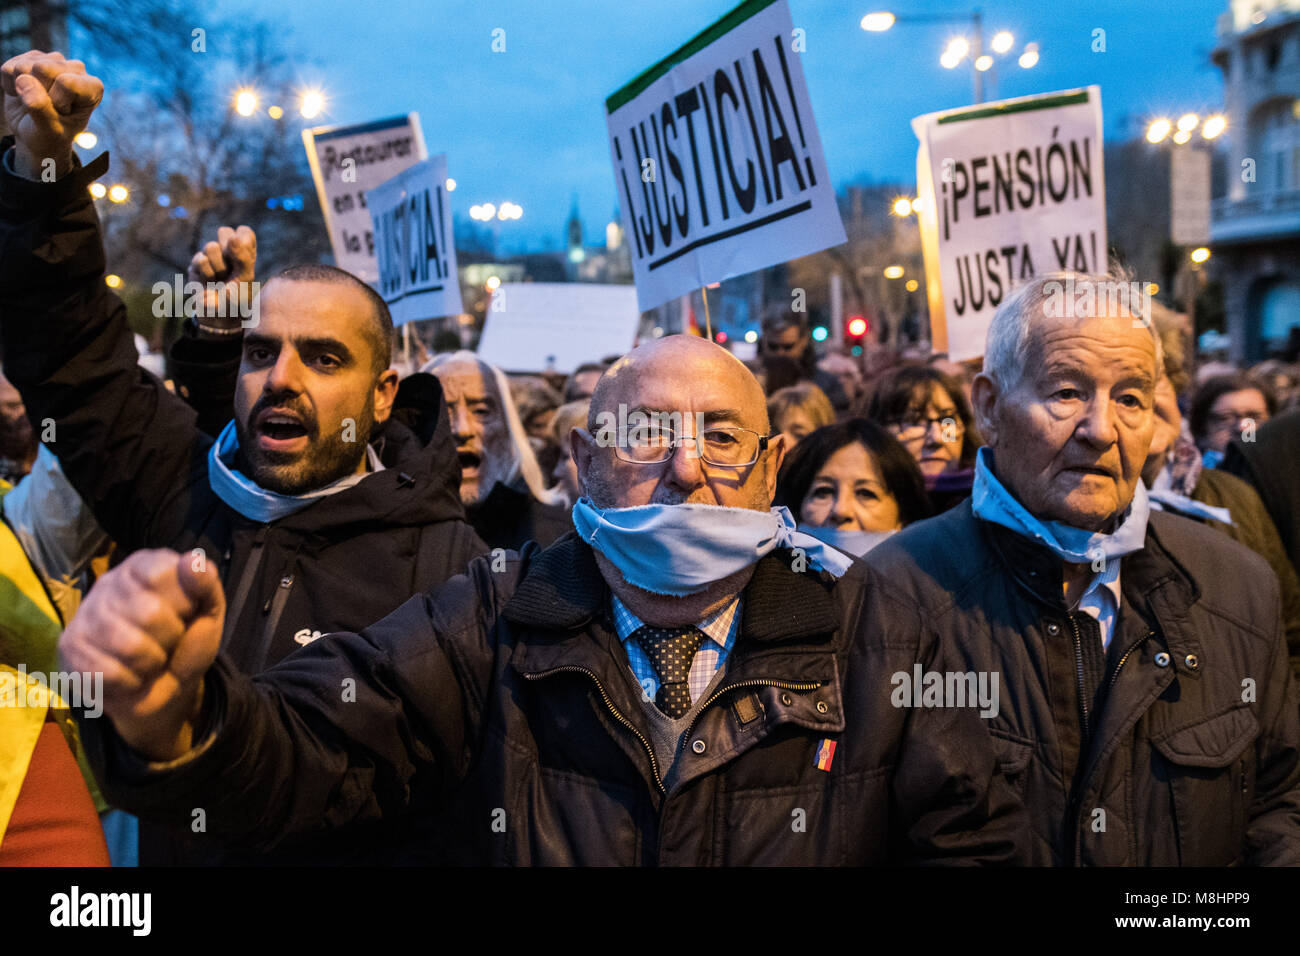 Madrid, Spain. 17th March, 2018. People protesting against Citizen Security Law also known as 'Gag Law', demanding freedom of expression. Retirees have joined the demonstration to also demand better pensions, in Madrid Spain. Credit: Marcos del Mazo/Alamy Live News Stock Photo